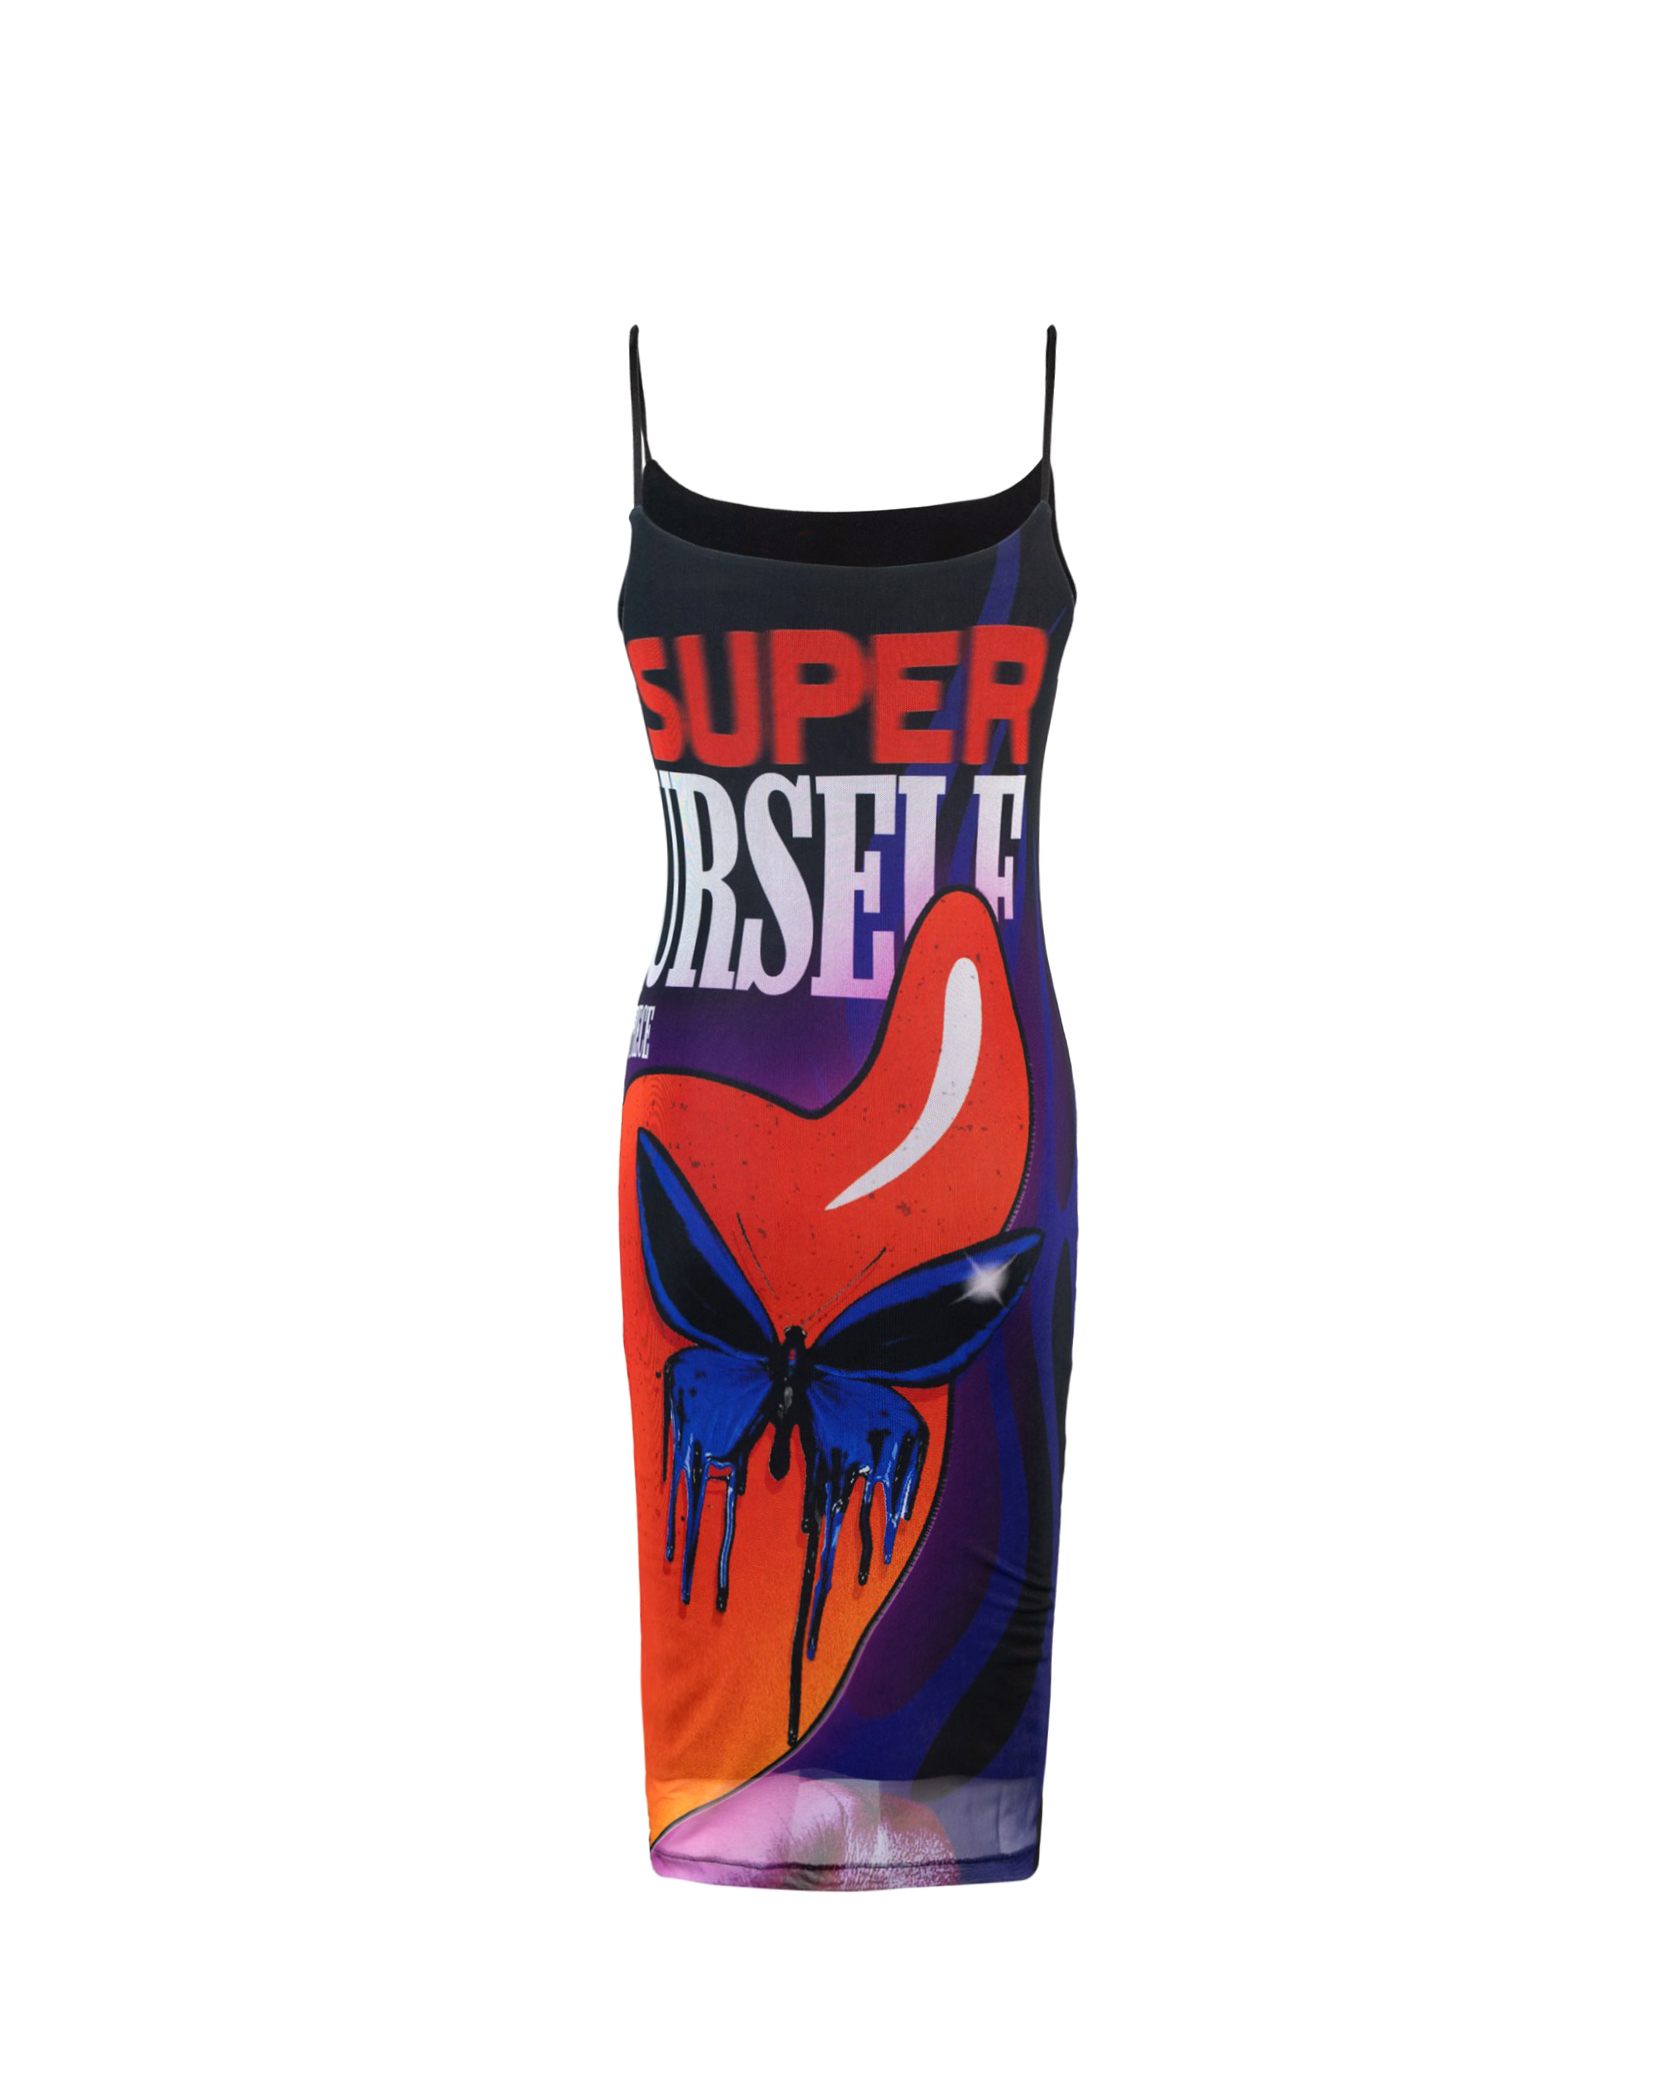 Shop Vision Of Super Mini Dress With "puffy Love" Print